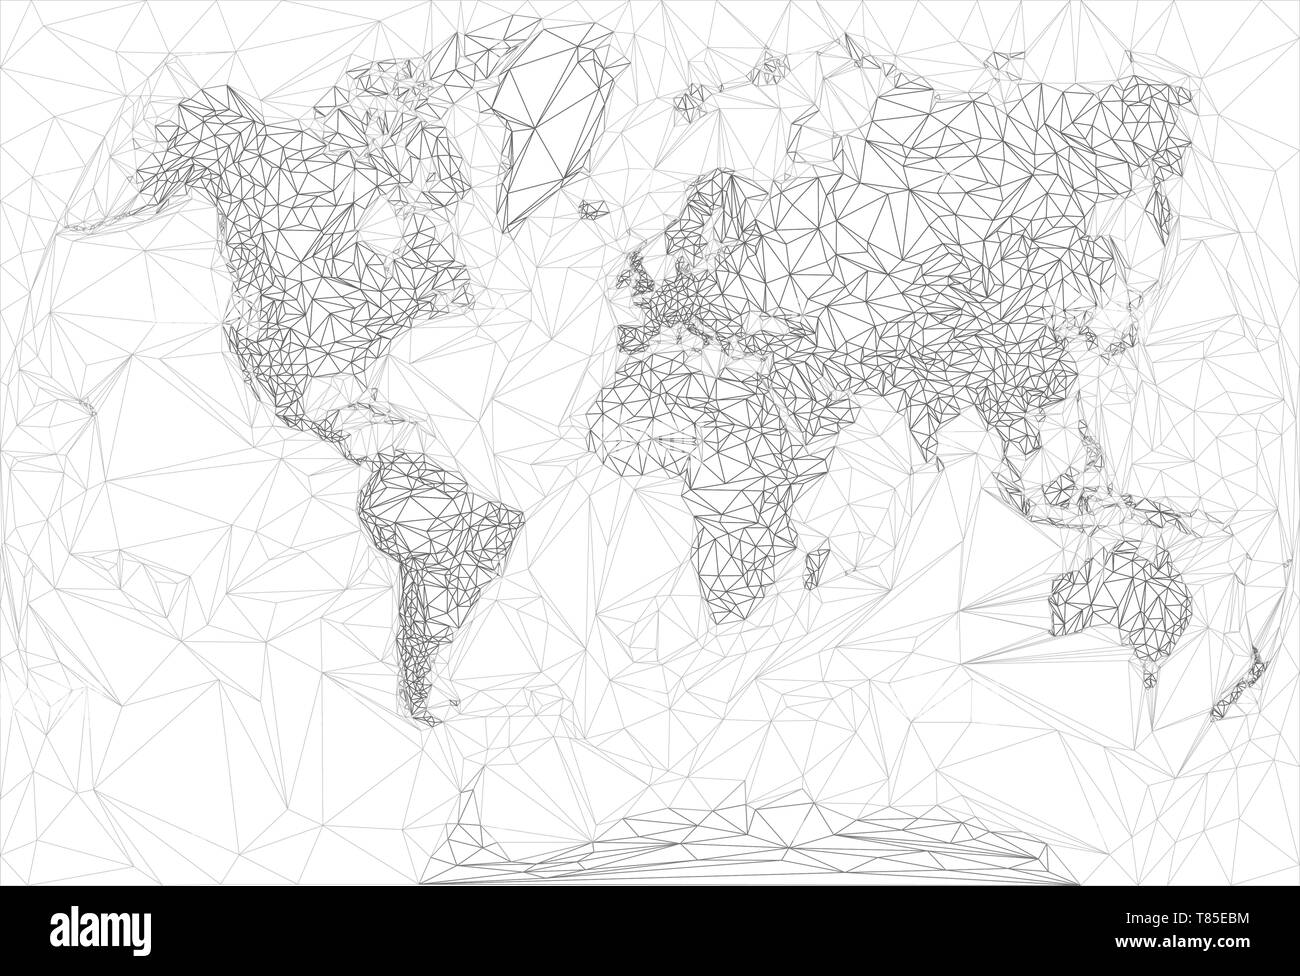 world map in polygonal style Stock Vector